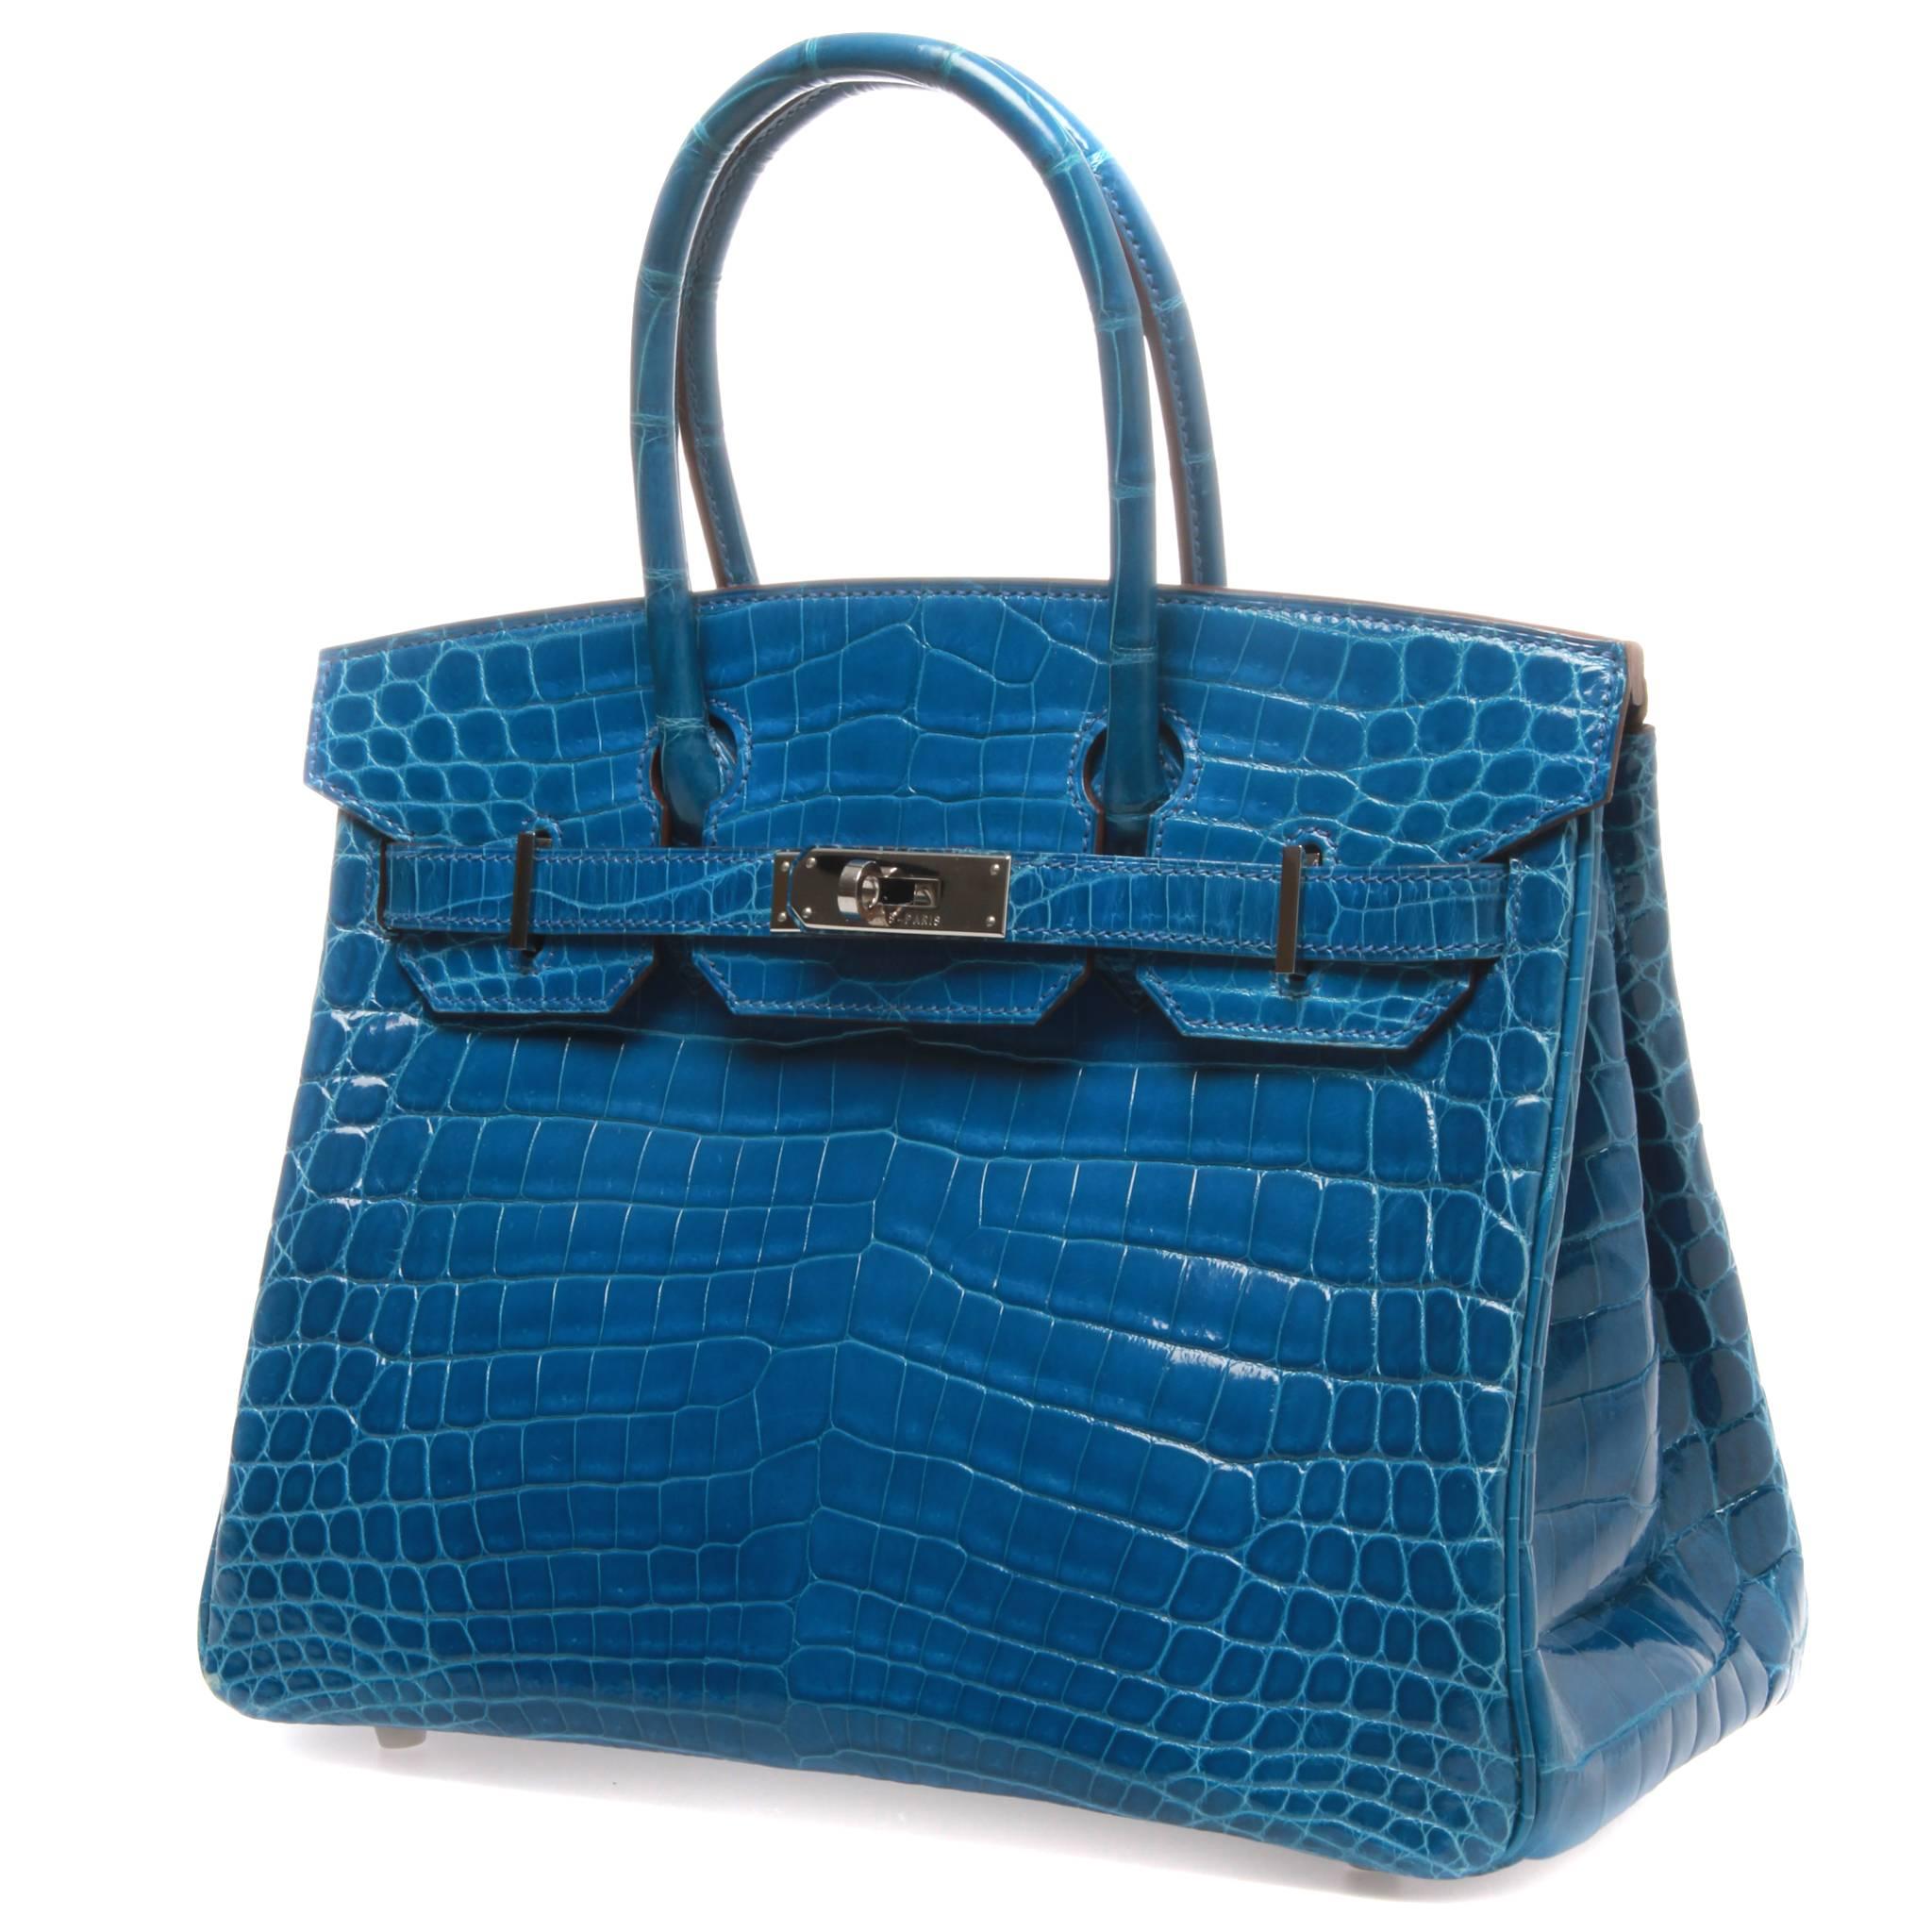 Enjoy a splash of Mykonos blue with this exclusive Hermès bag, made out of durable crocodile material that contributes to its luxurious design. 
Chevre interior and multiple pouches to store your belongings. The bag is simple and exquisite,